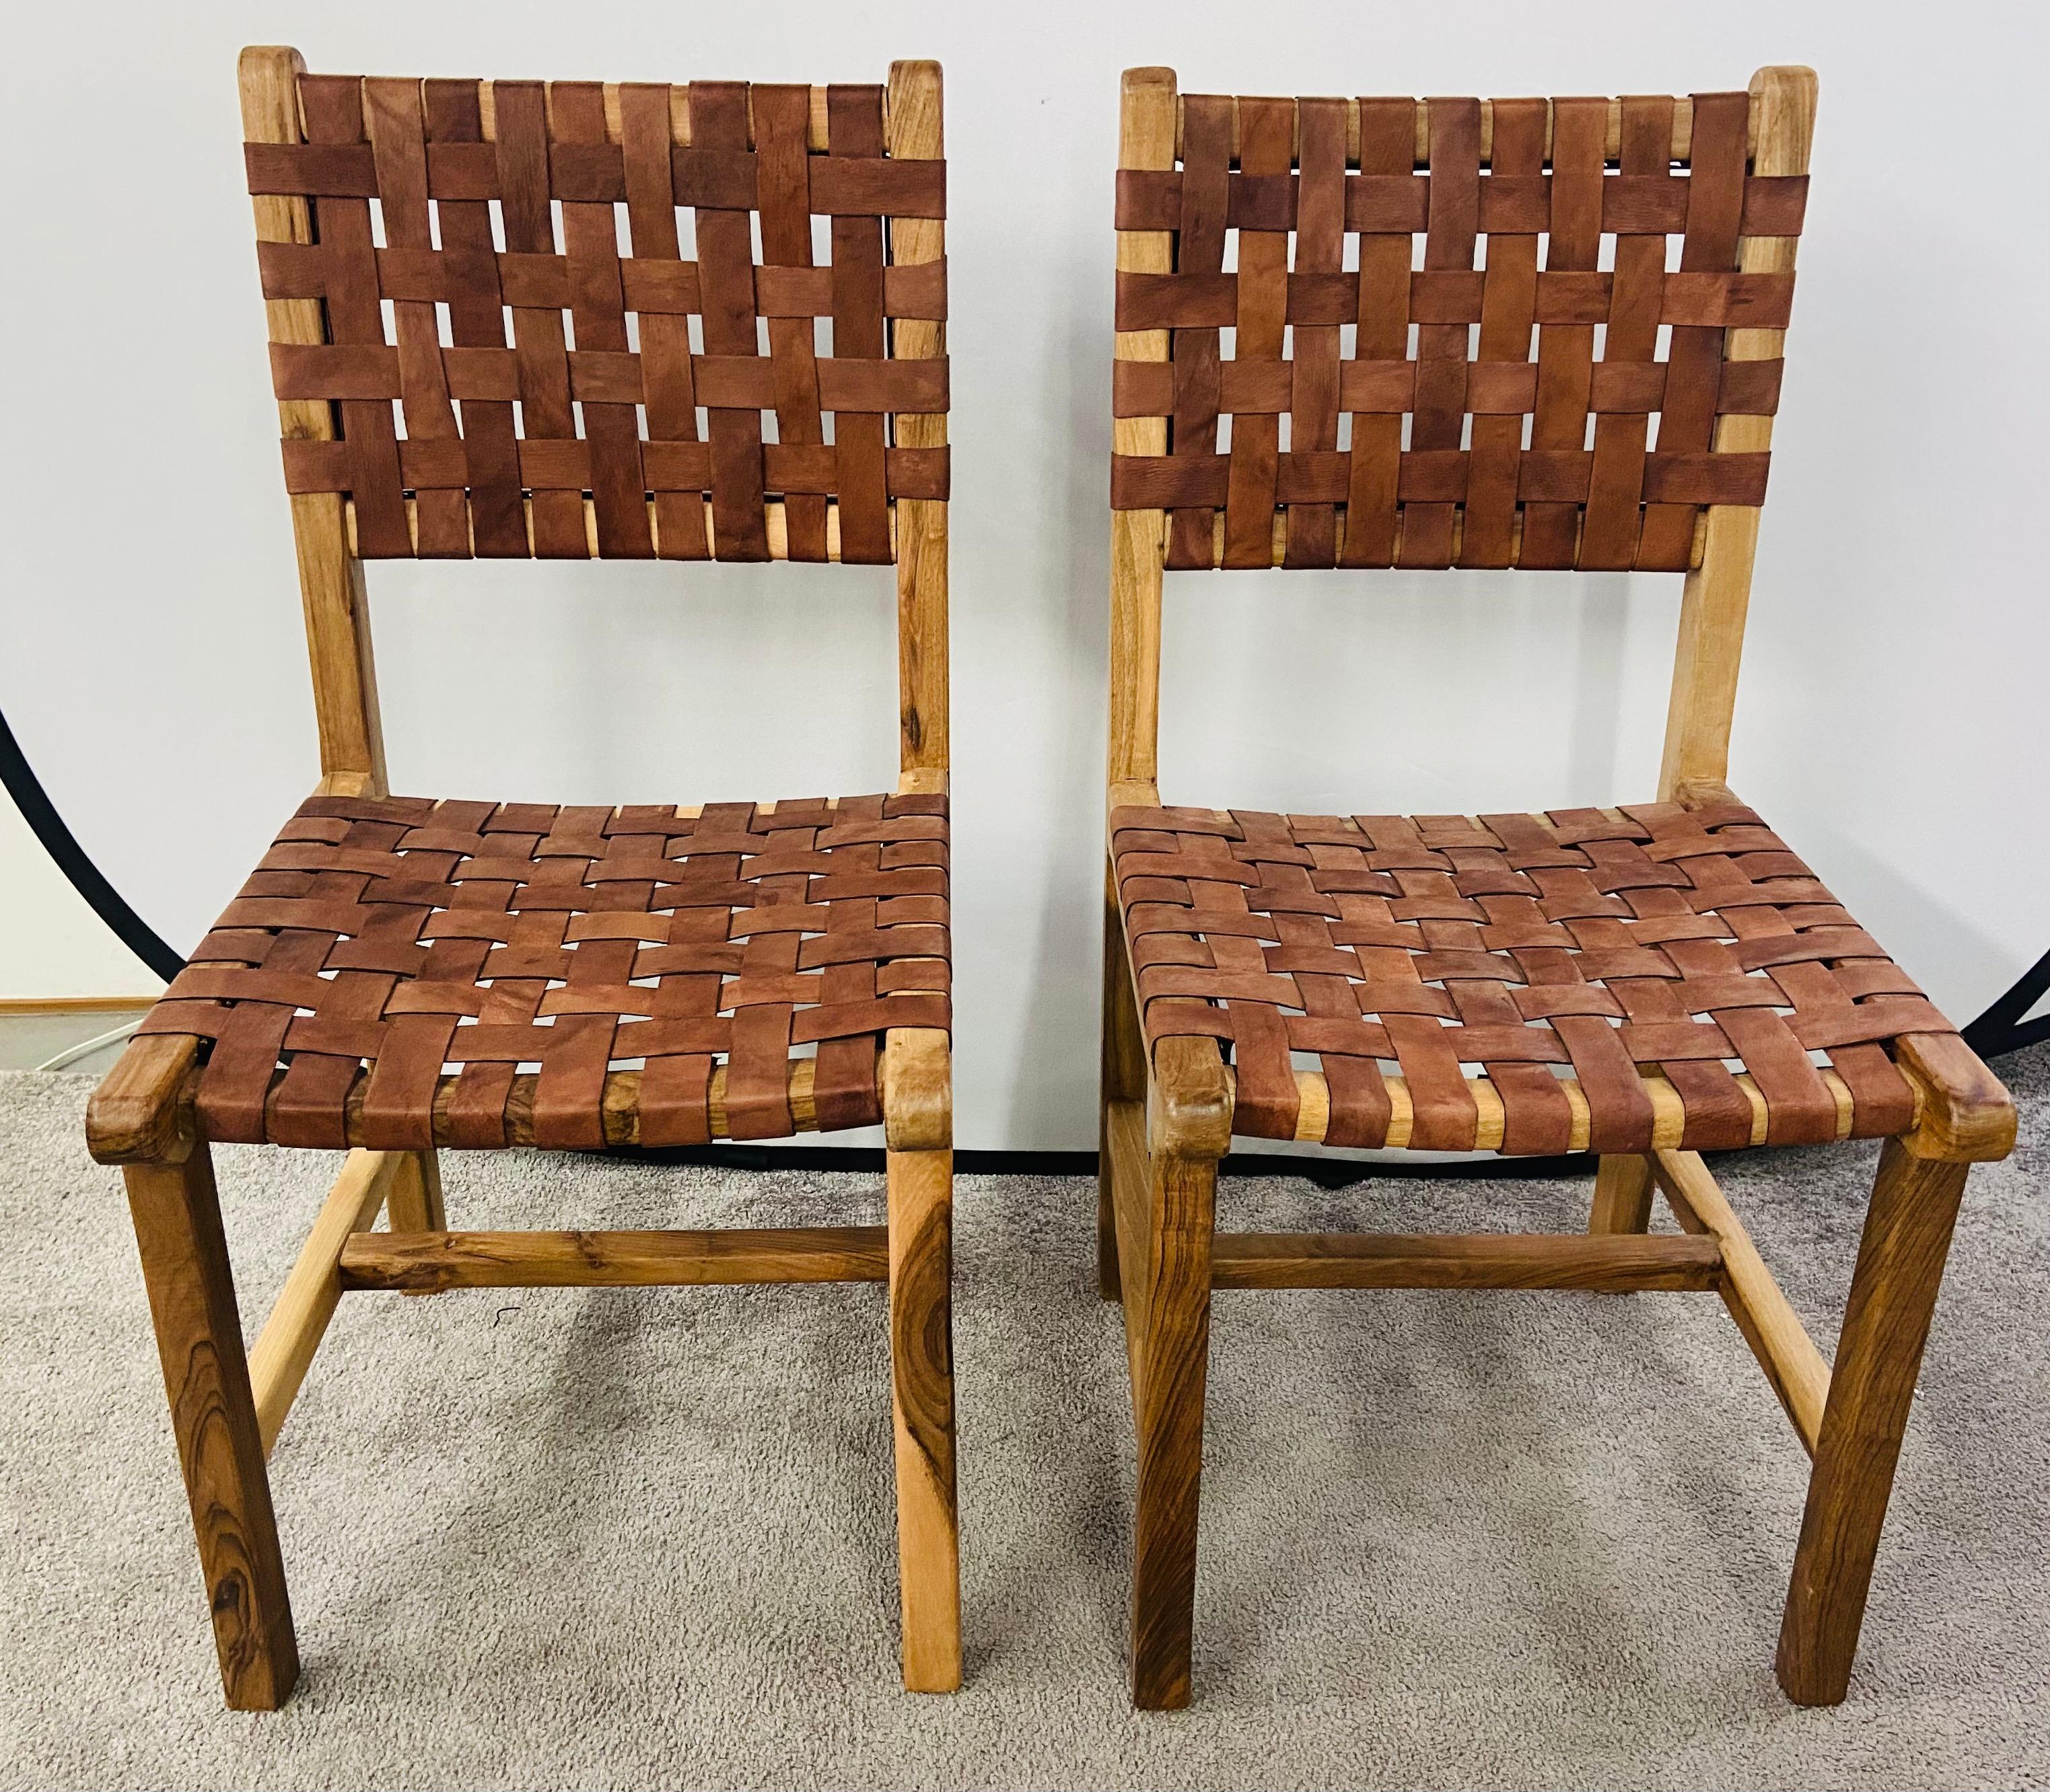 A hight quality set of four Mid-Century Modern style side or dining chairs in the manner of Jens Risom. The chairs are finely carved of hight quality walnut wood showing beautiful natural grains and burls on the frame. Made in a mesh woven natural